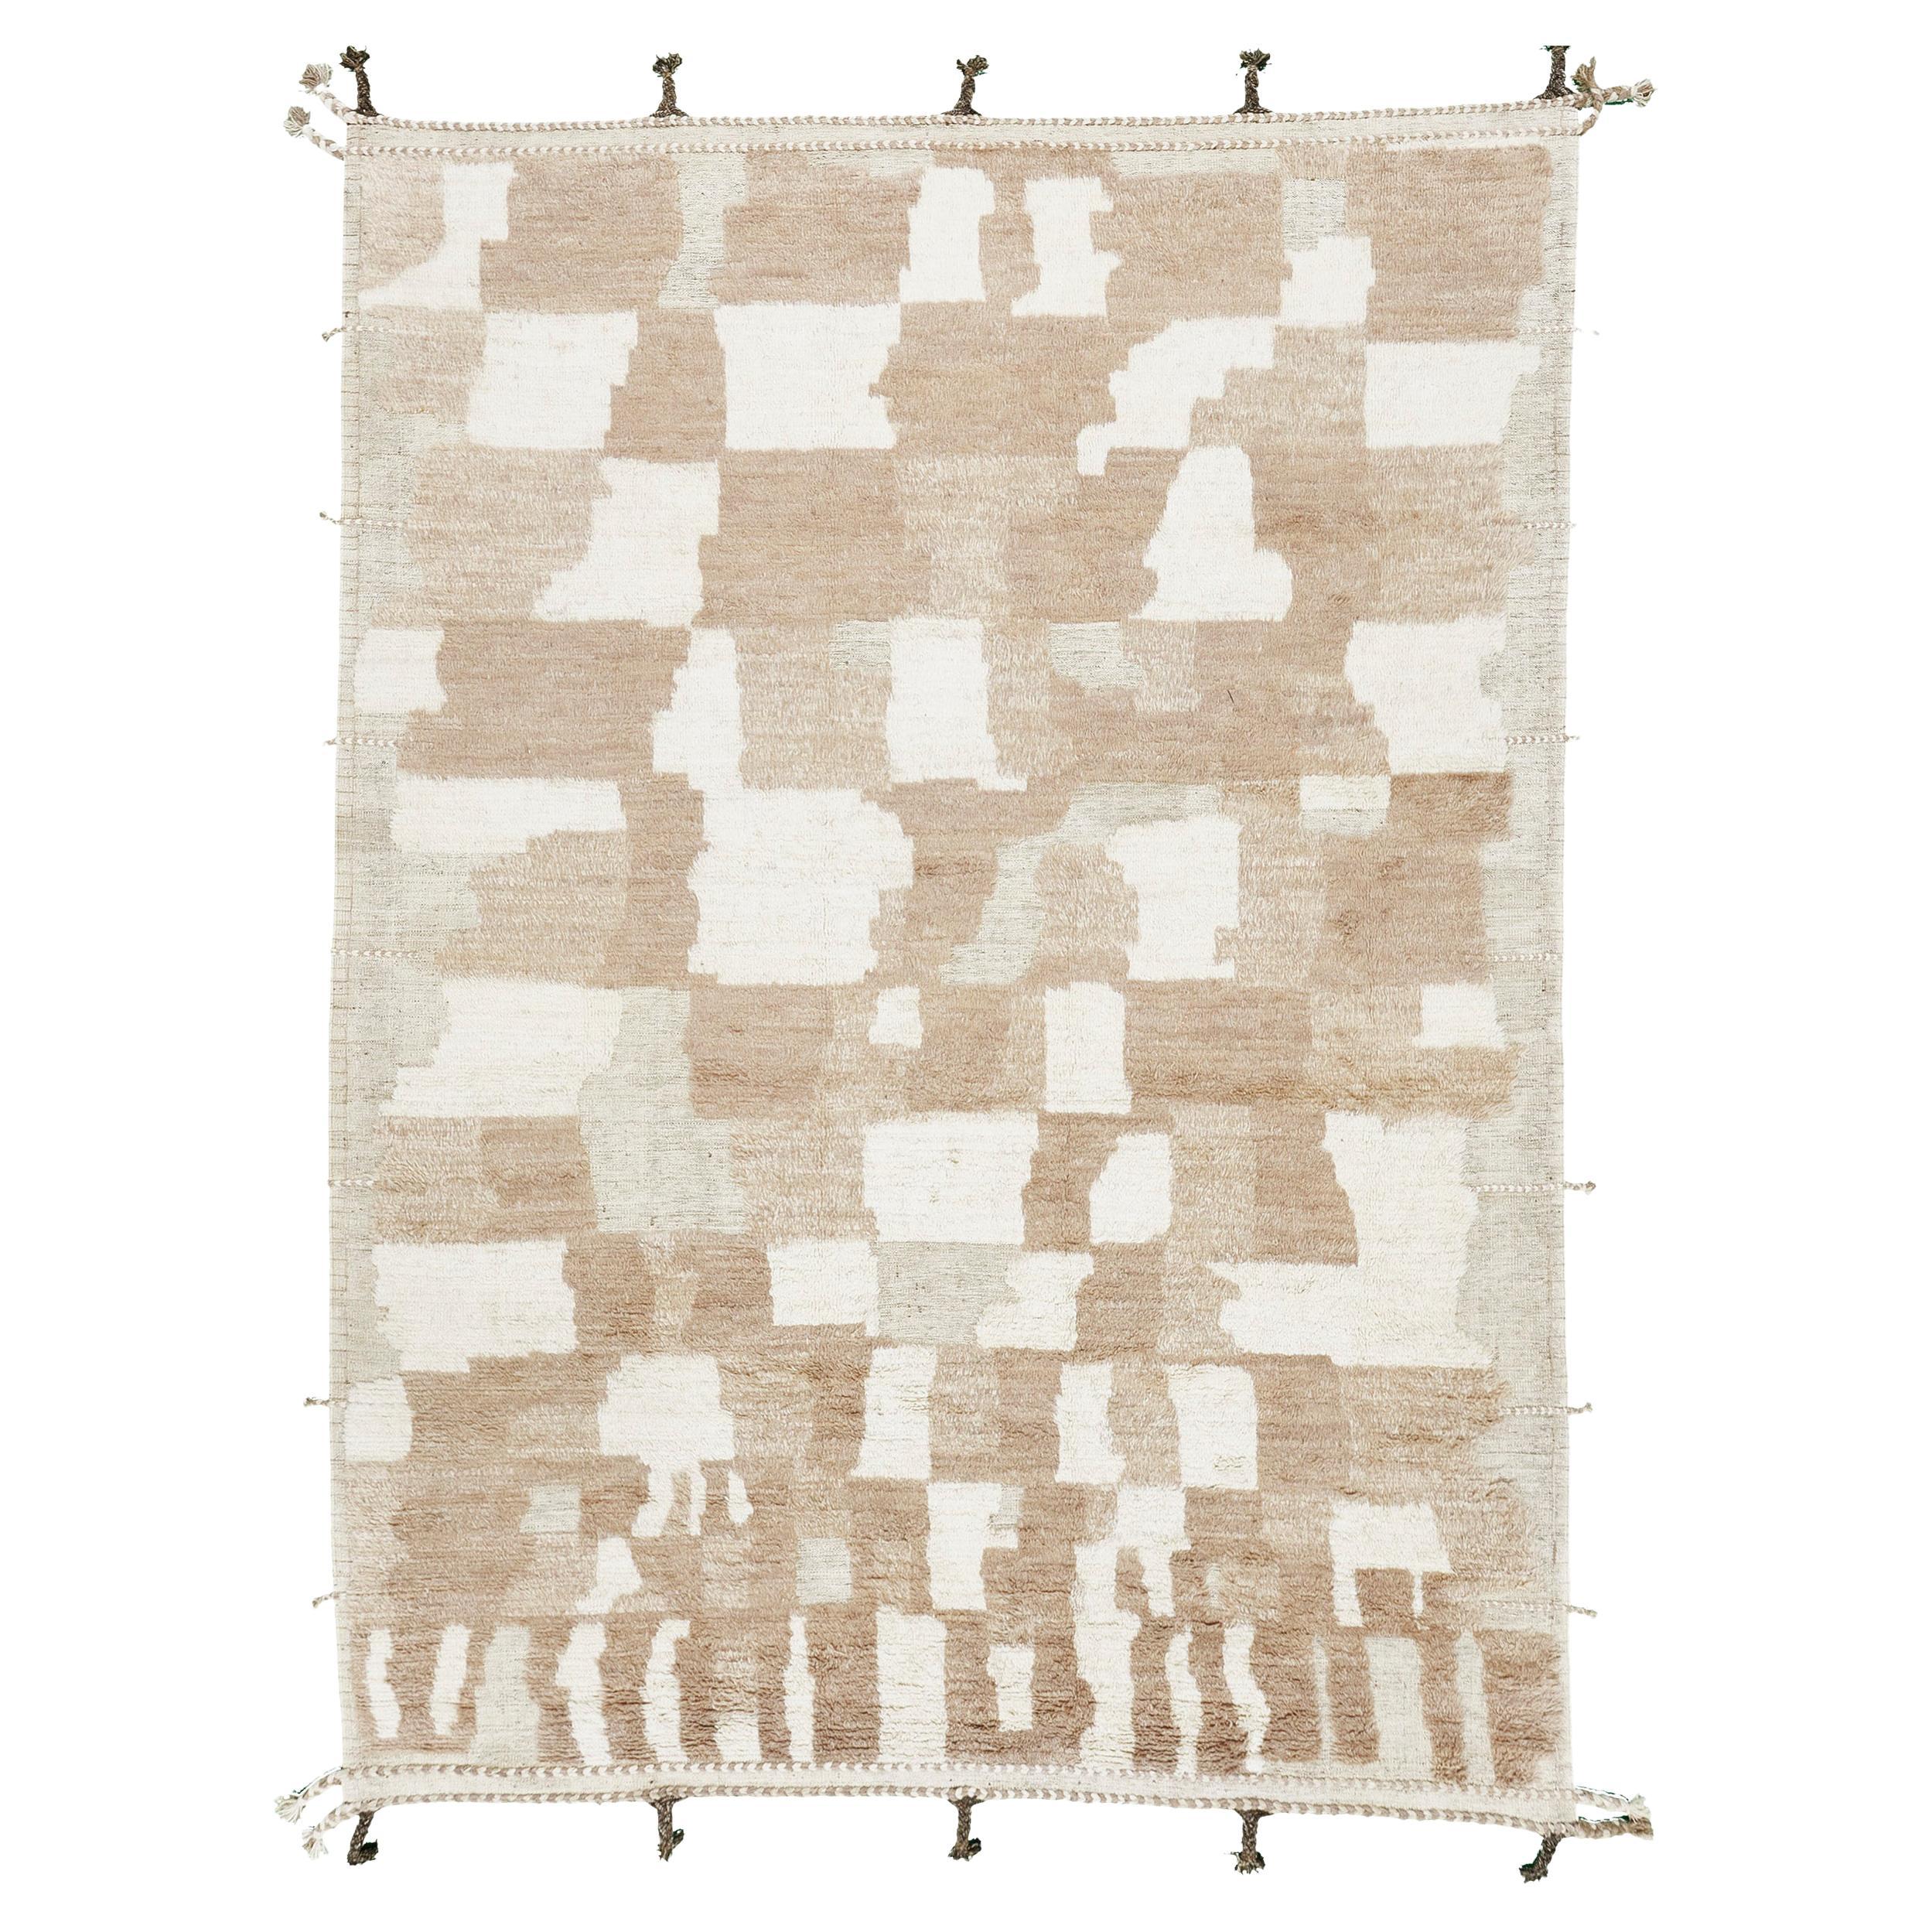 Ussem, Kust Collection by Mehraban Rugs For Sale